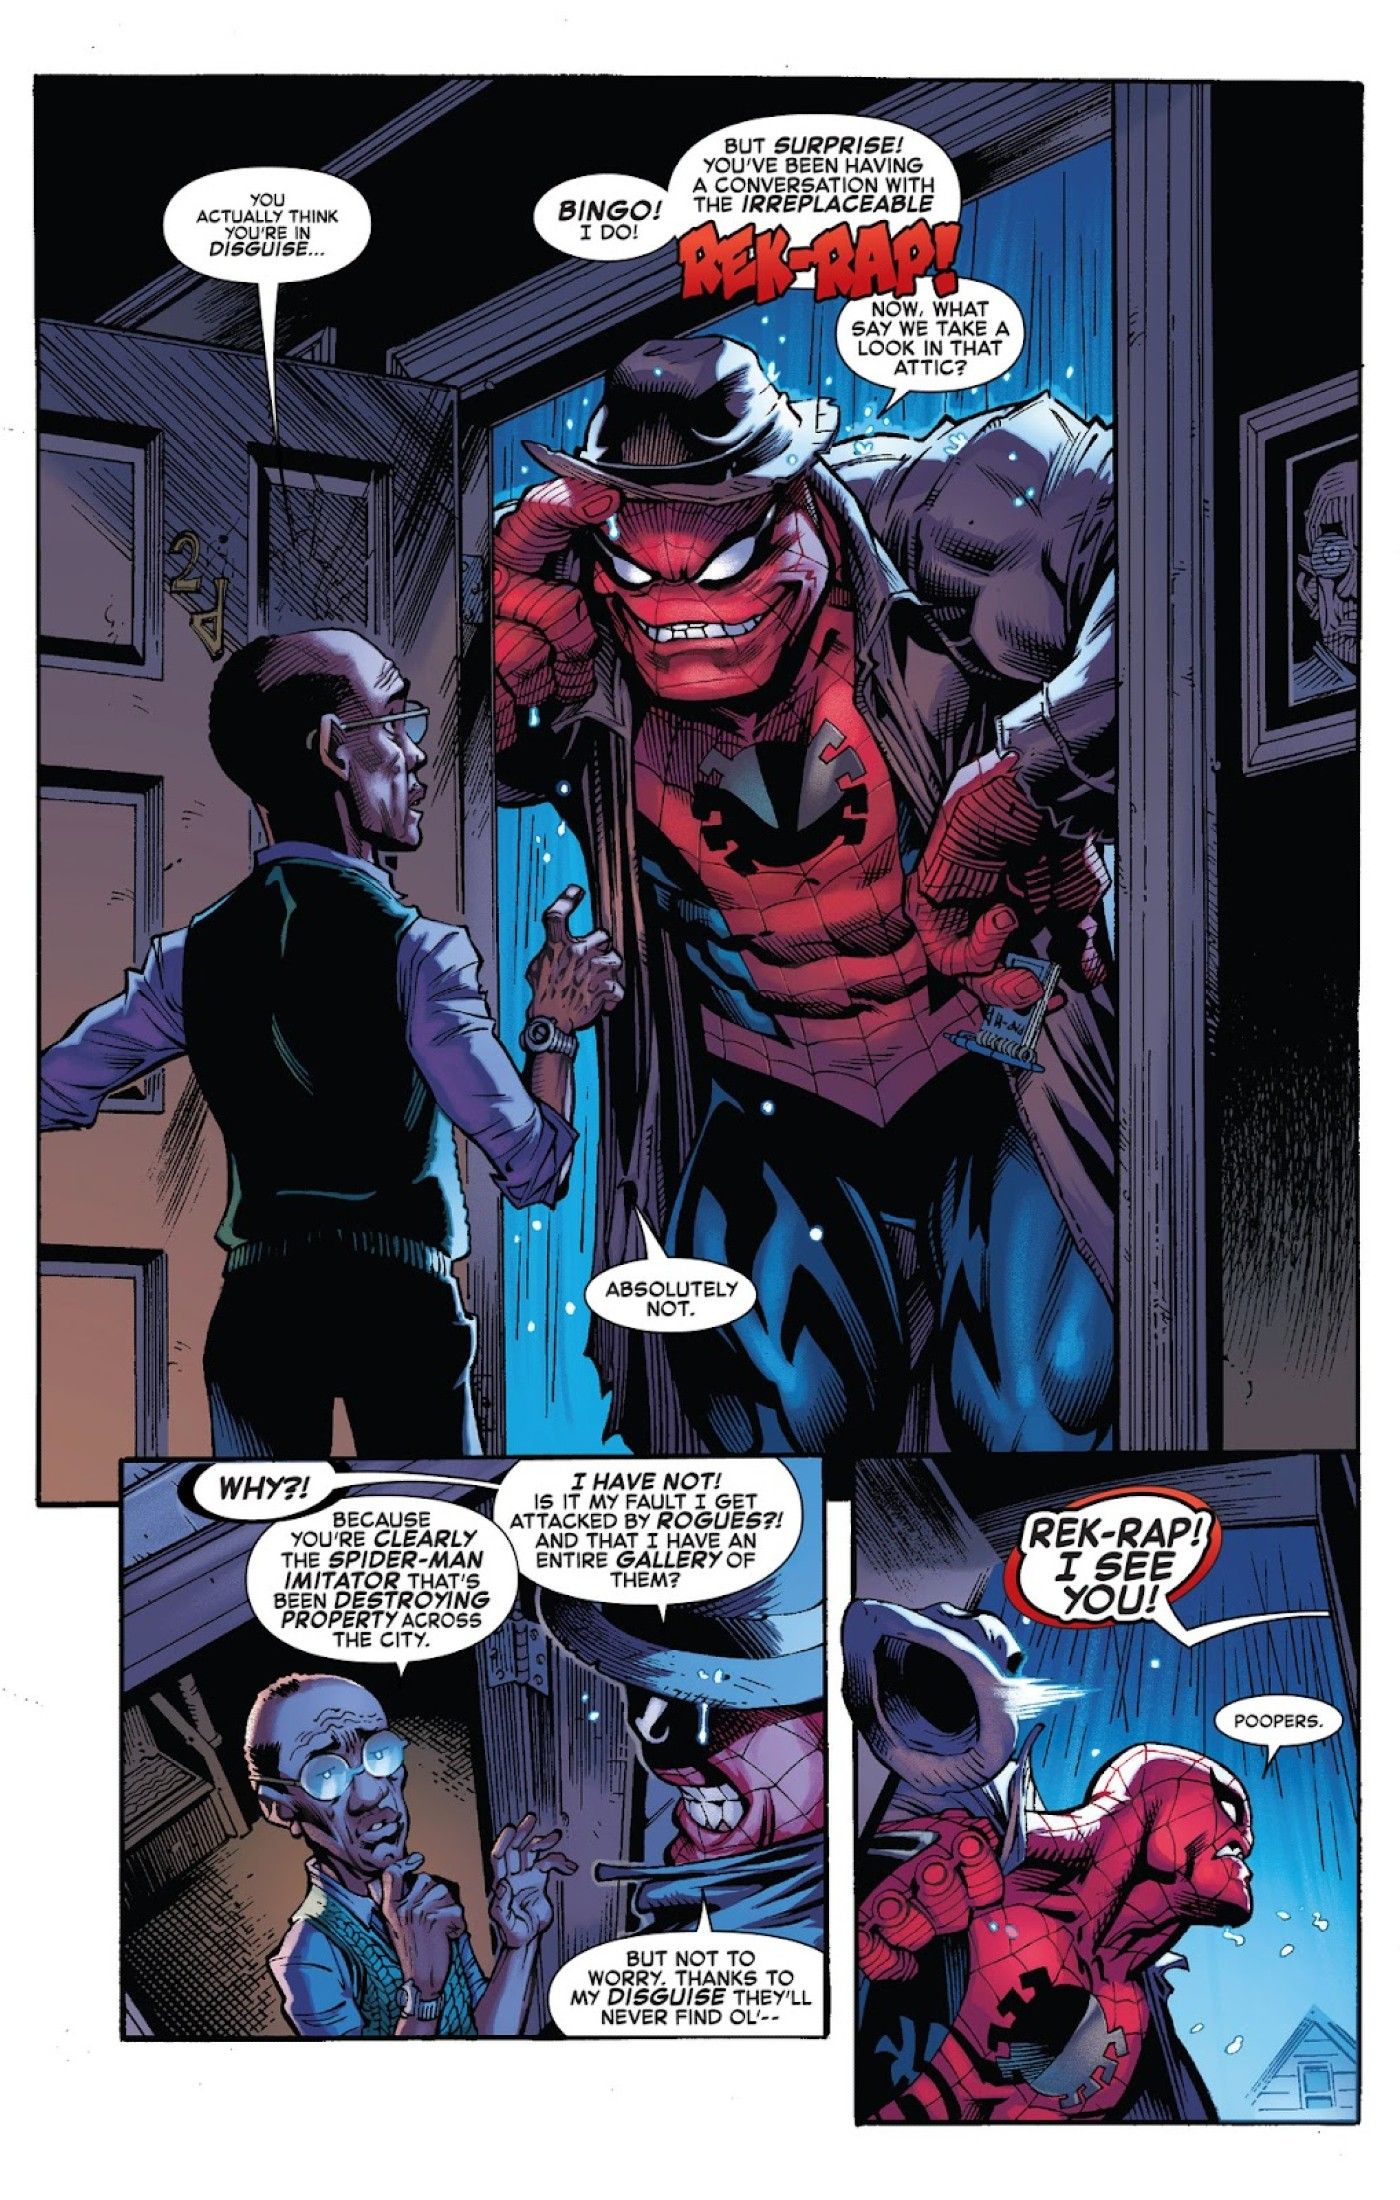 Spider-Man from Hell Rek-Rap in a bad disguise until Grave Goblin sees him